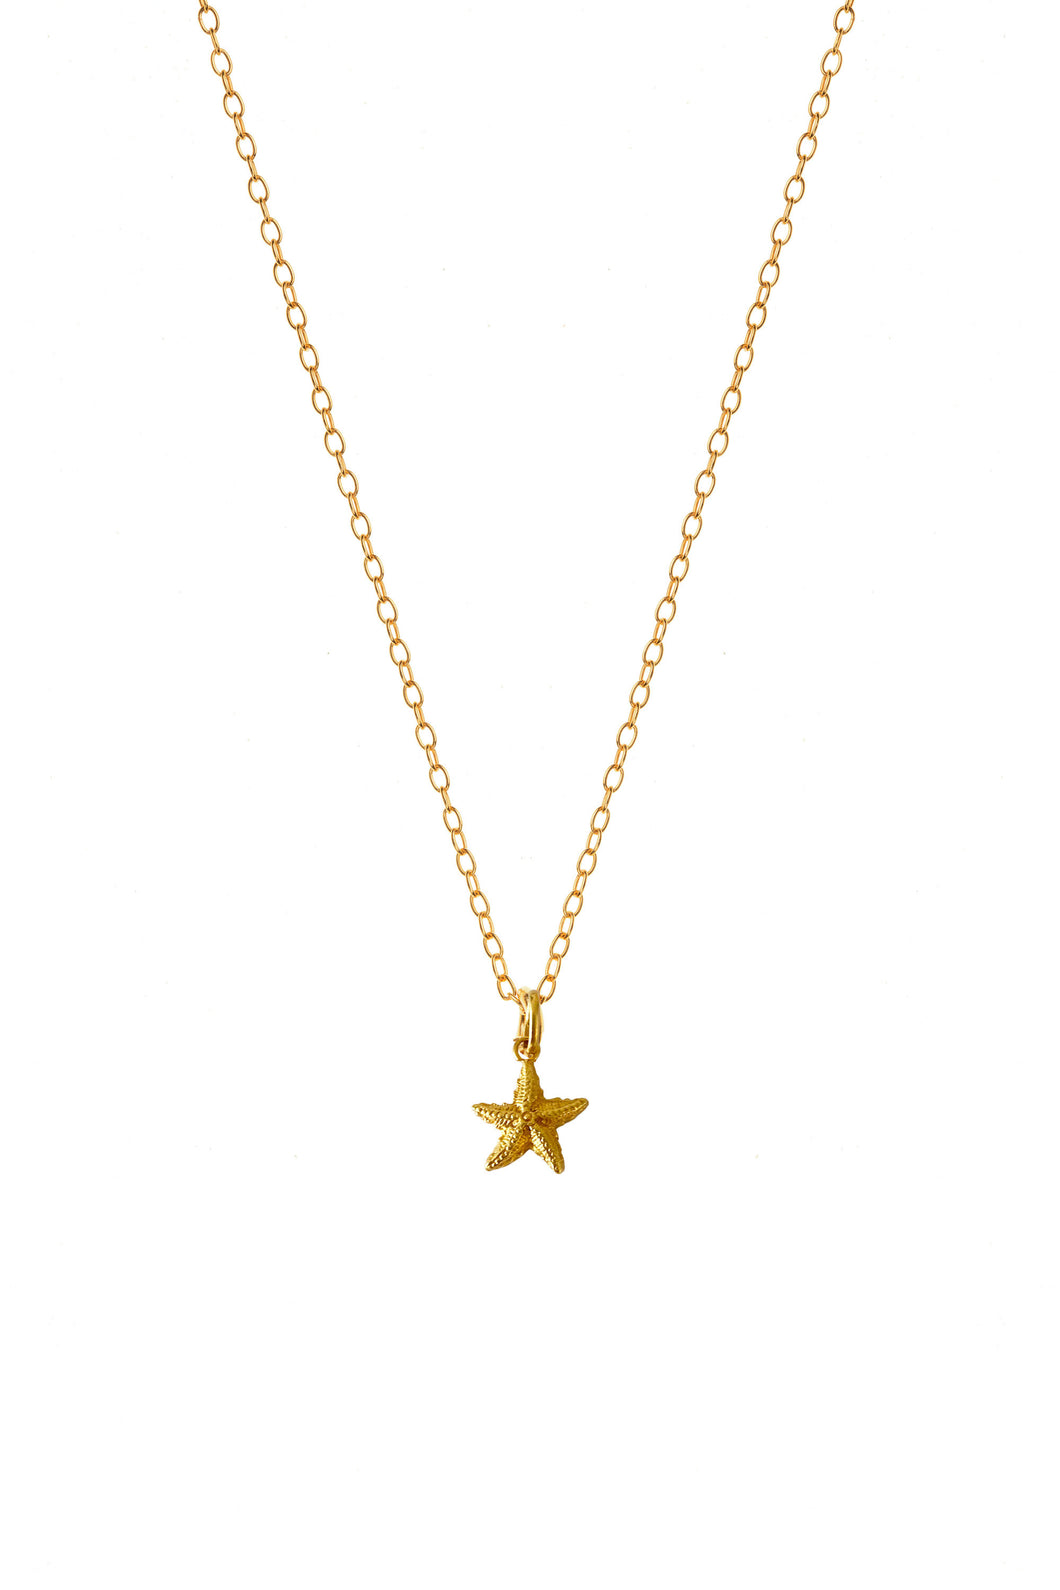 Gold Starfish Charm Necklace